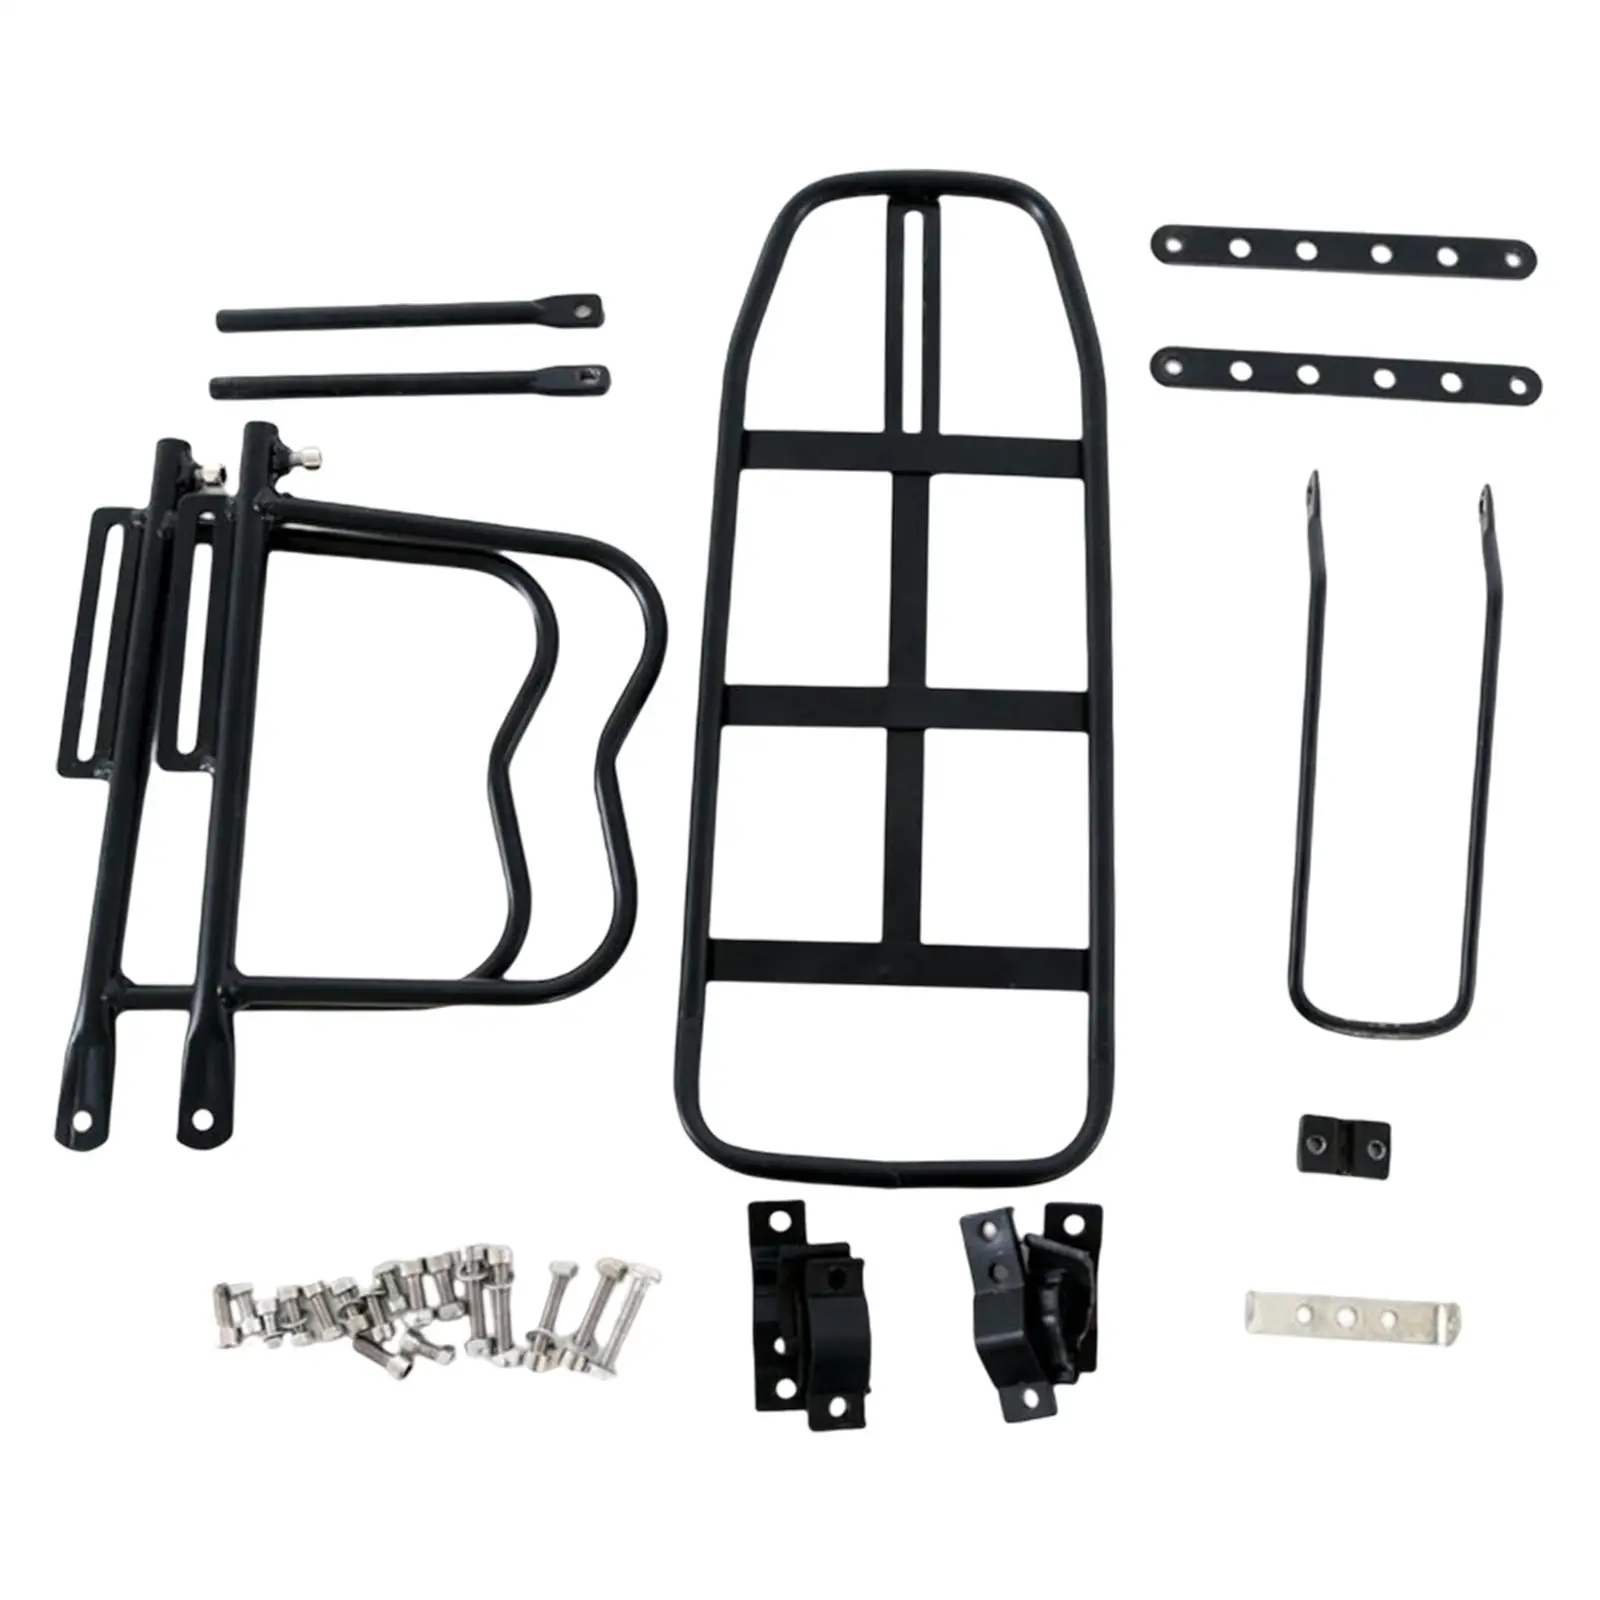 Bike Rear Luggage Cargo Rack Easy Installation Universal Portable Lightweight Accessories for Bike Cycling Modification